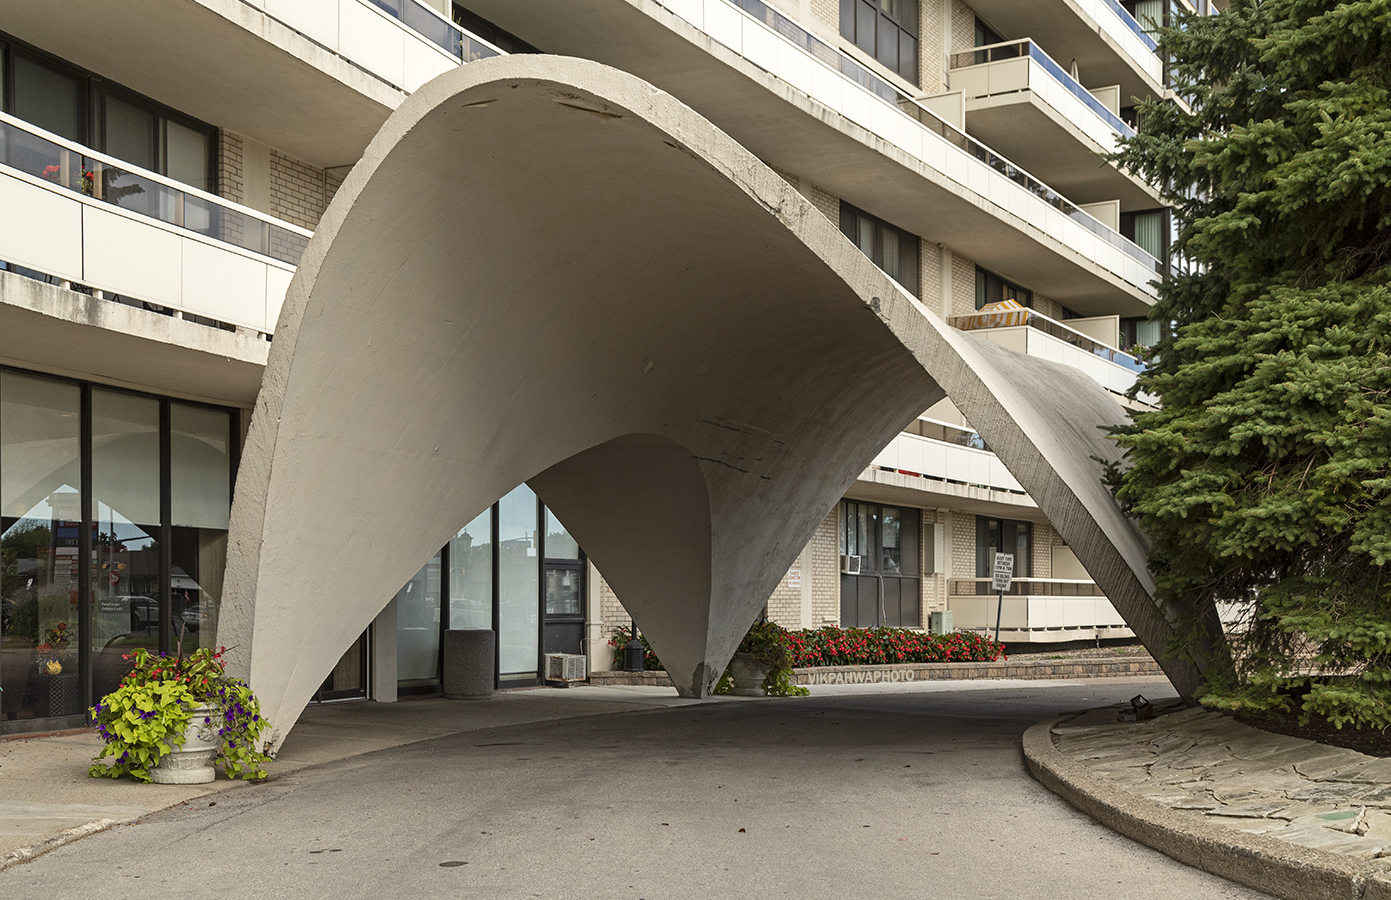 20200902. Now that’s a serious modern canopy – thin smooth concrete